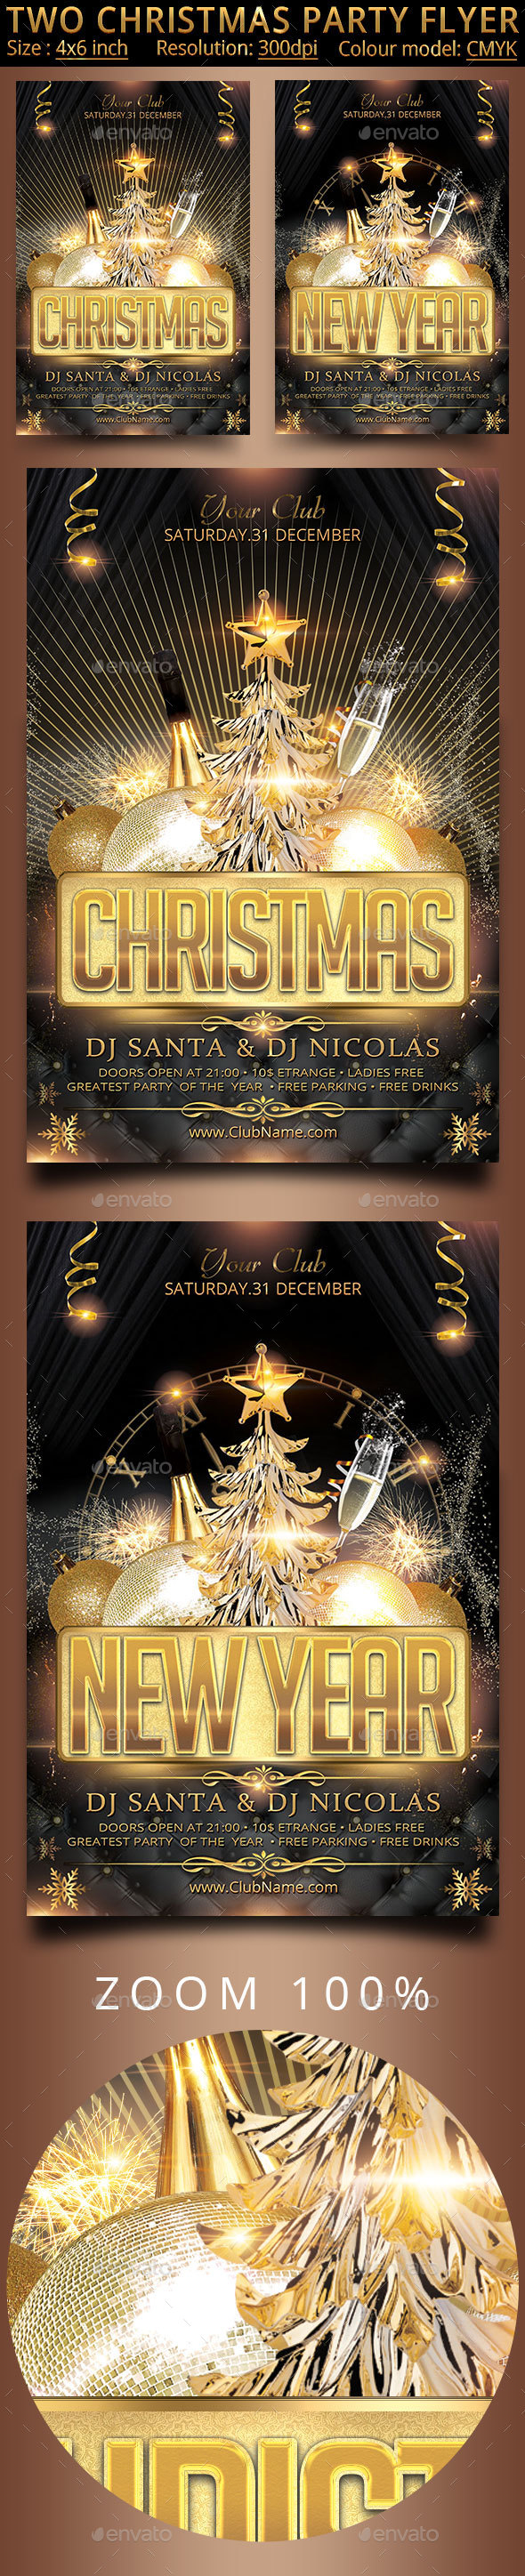 Two Christmas Party Flyer